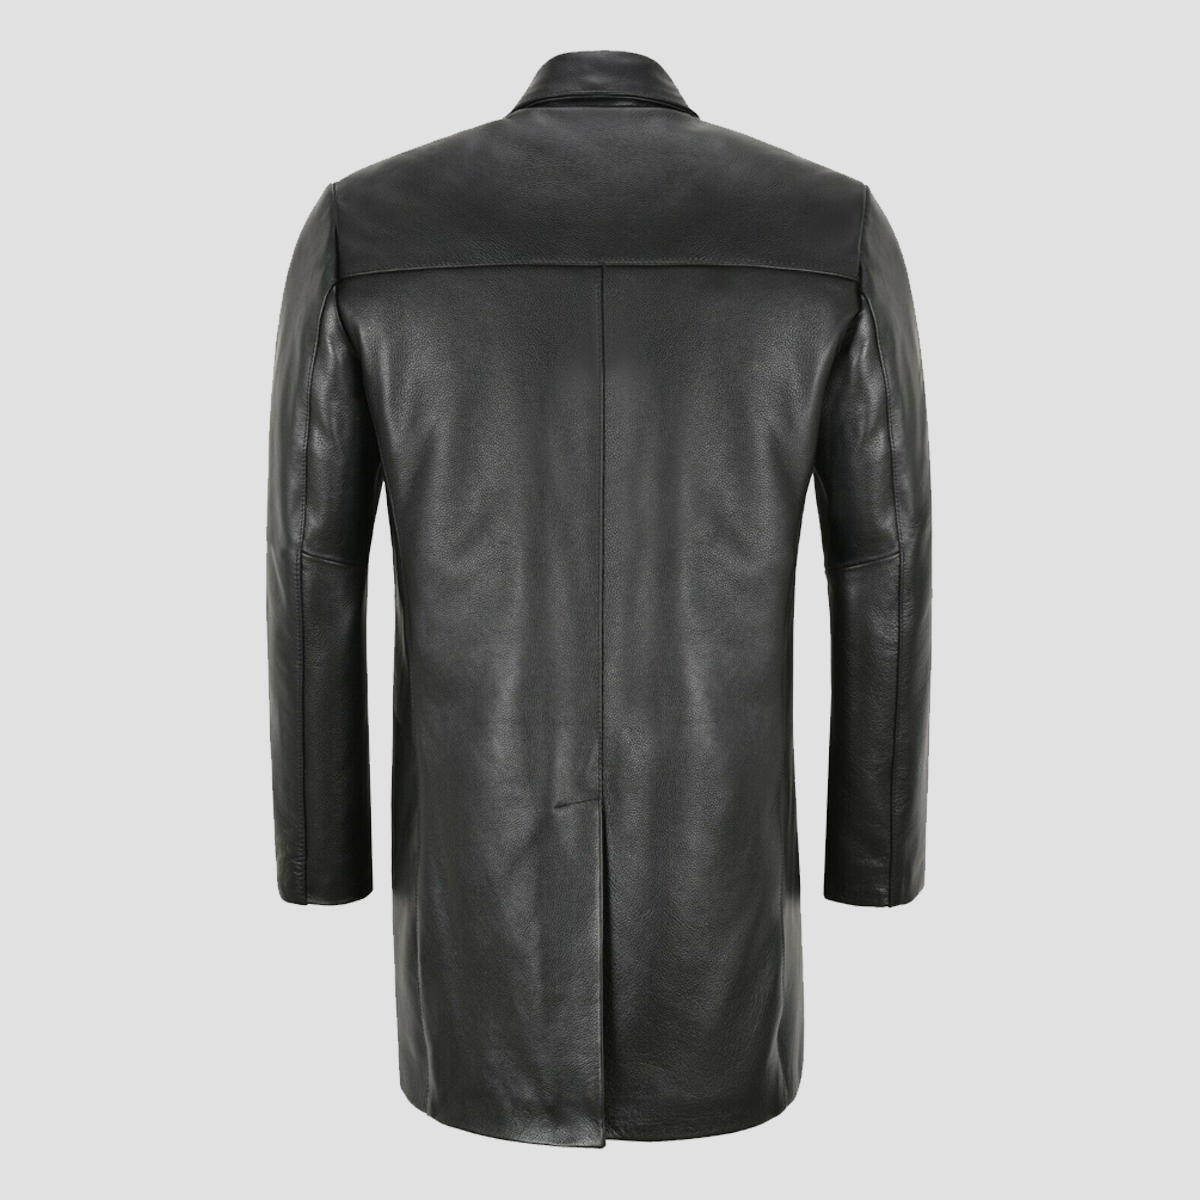 Authentic Long Black Leather Coat - The Vintage Leather